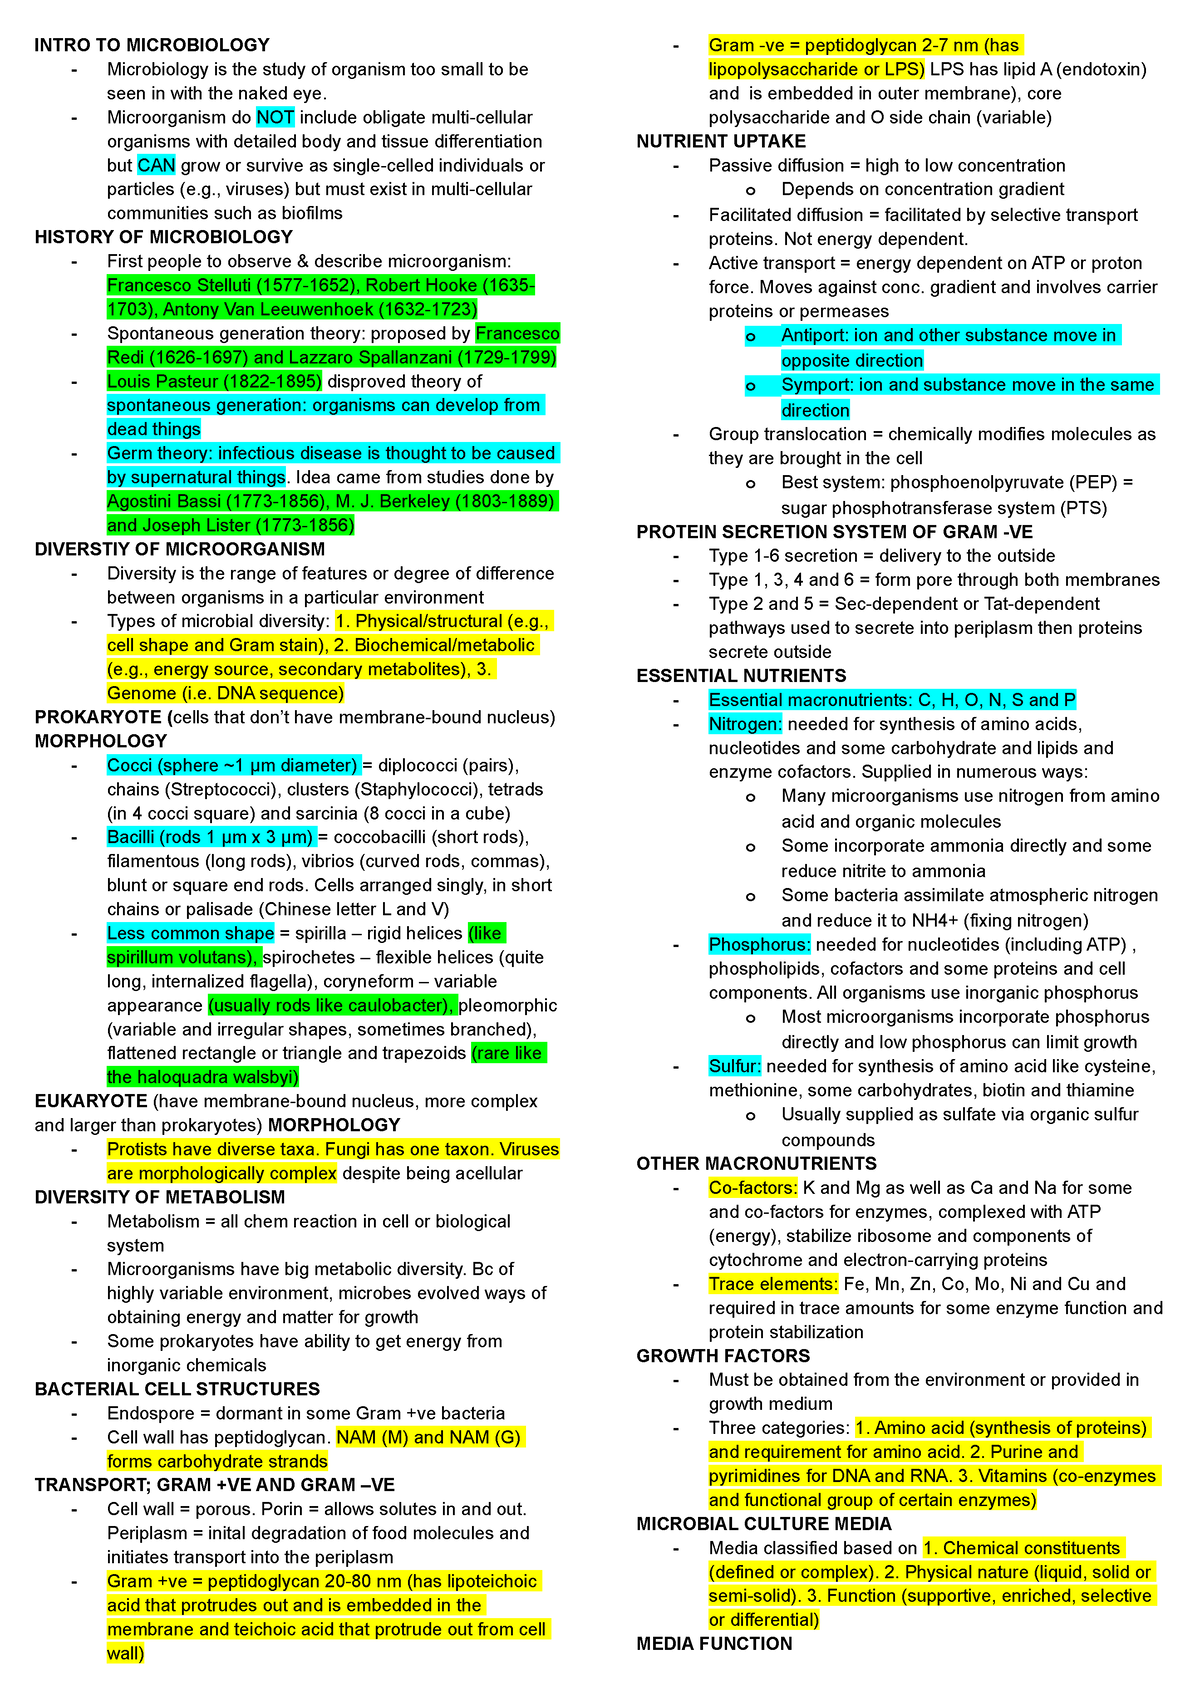 GMCR ECS - Cheat Sheet for exam - INTRO TO MICROBIOLOGY Microbiology is ...